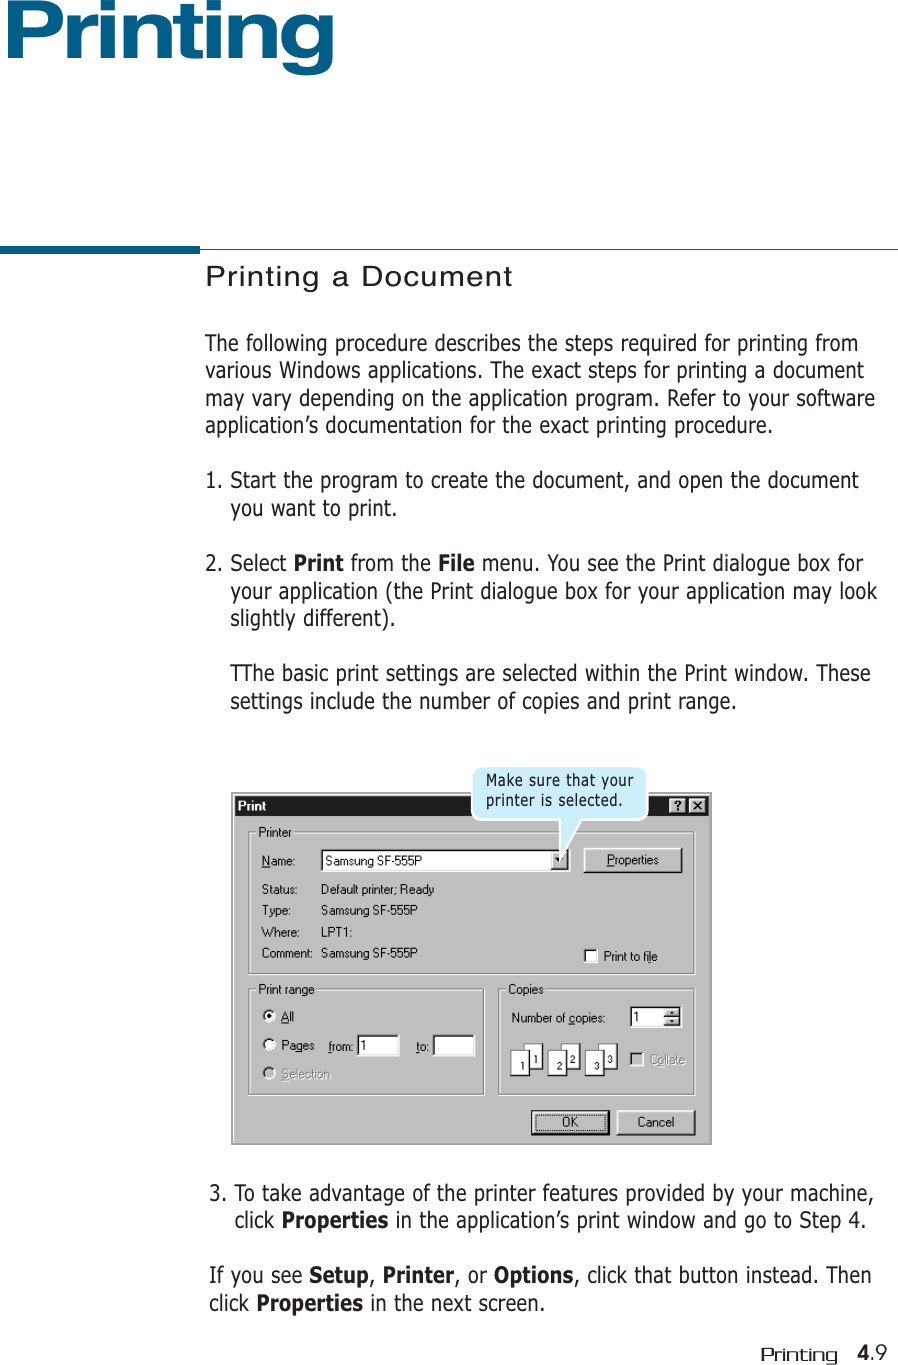 4.9Printing3. To take advantage of the printer features provided by your machine,click Properties in the application’s print window and go to Step 4.If you see Setup, Printer, or Options, click that button instead. Thenclick Properties in the next screen.Printing a DocumentThe following procedure describes the steps required for printing fromvarious Windows applications. The exact steps for printing a documentmay vary depending on the application program. Refer to your softwareapplication’s documentation for the exact printing procedure.1. Start the program to create the document, and open the documentyou want to print.2. Select Print from the File menu. You see the Print dialogue box foryour application (the Print dialogue box for your application may lookslightly different). TThe basic print settings are selected within the Print window. Thesesettings include the number of copies and print range.PrintingMake sure that yourprinter is selected.